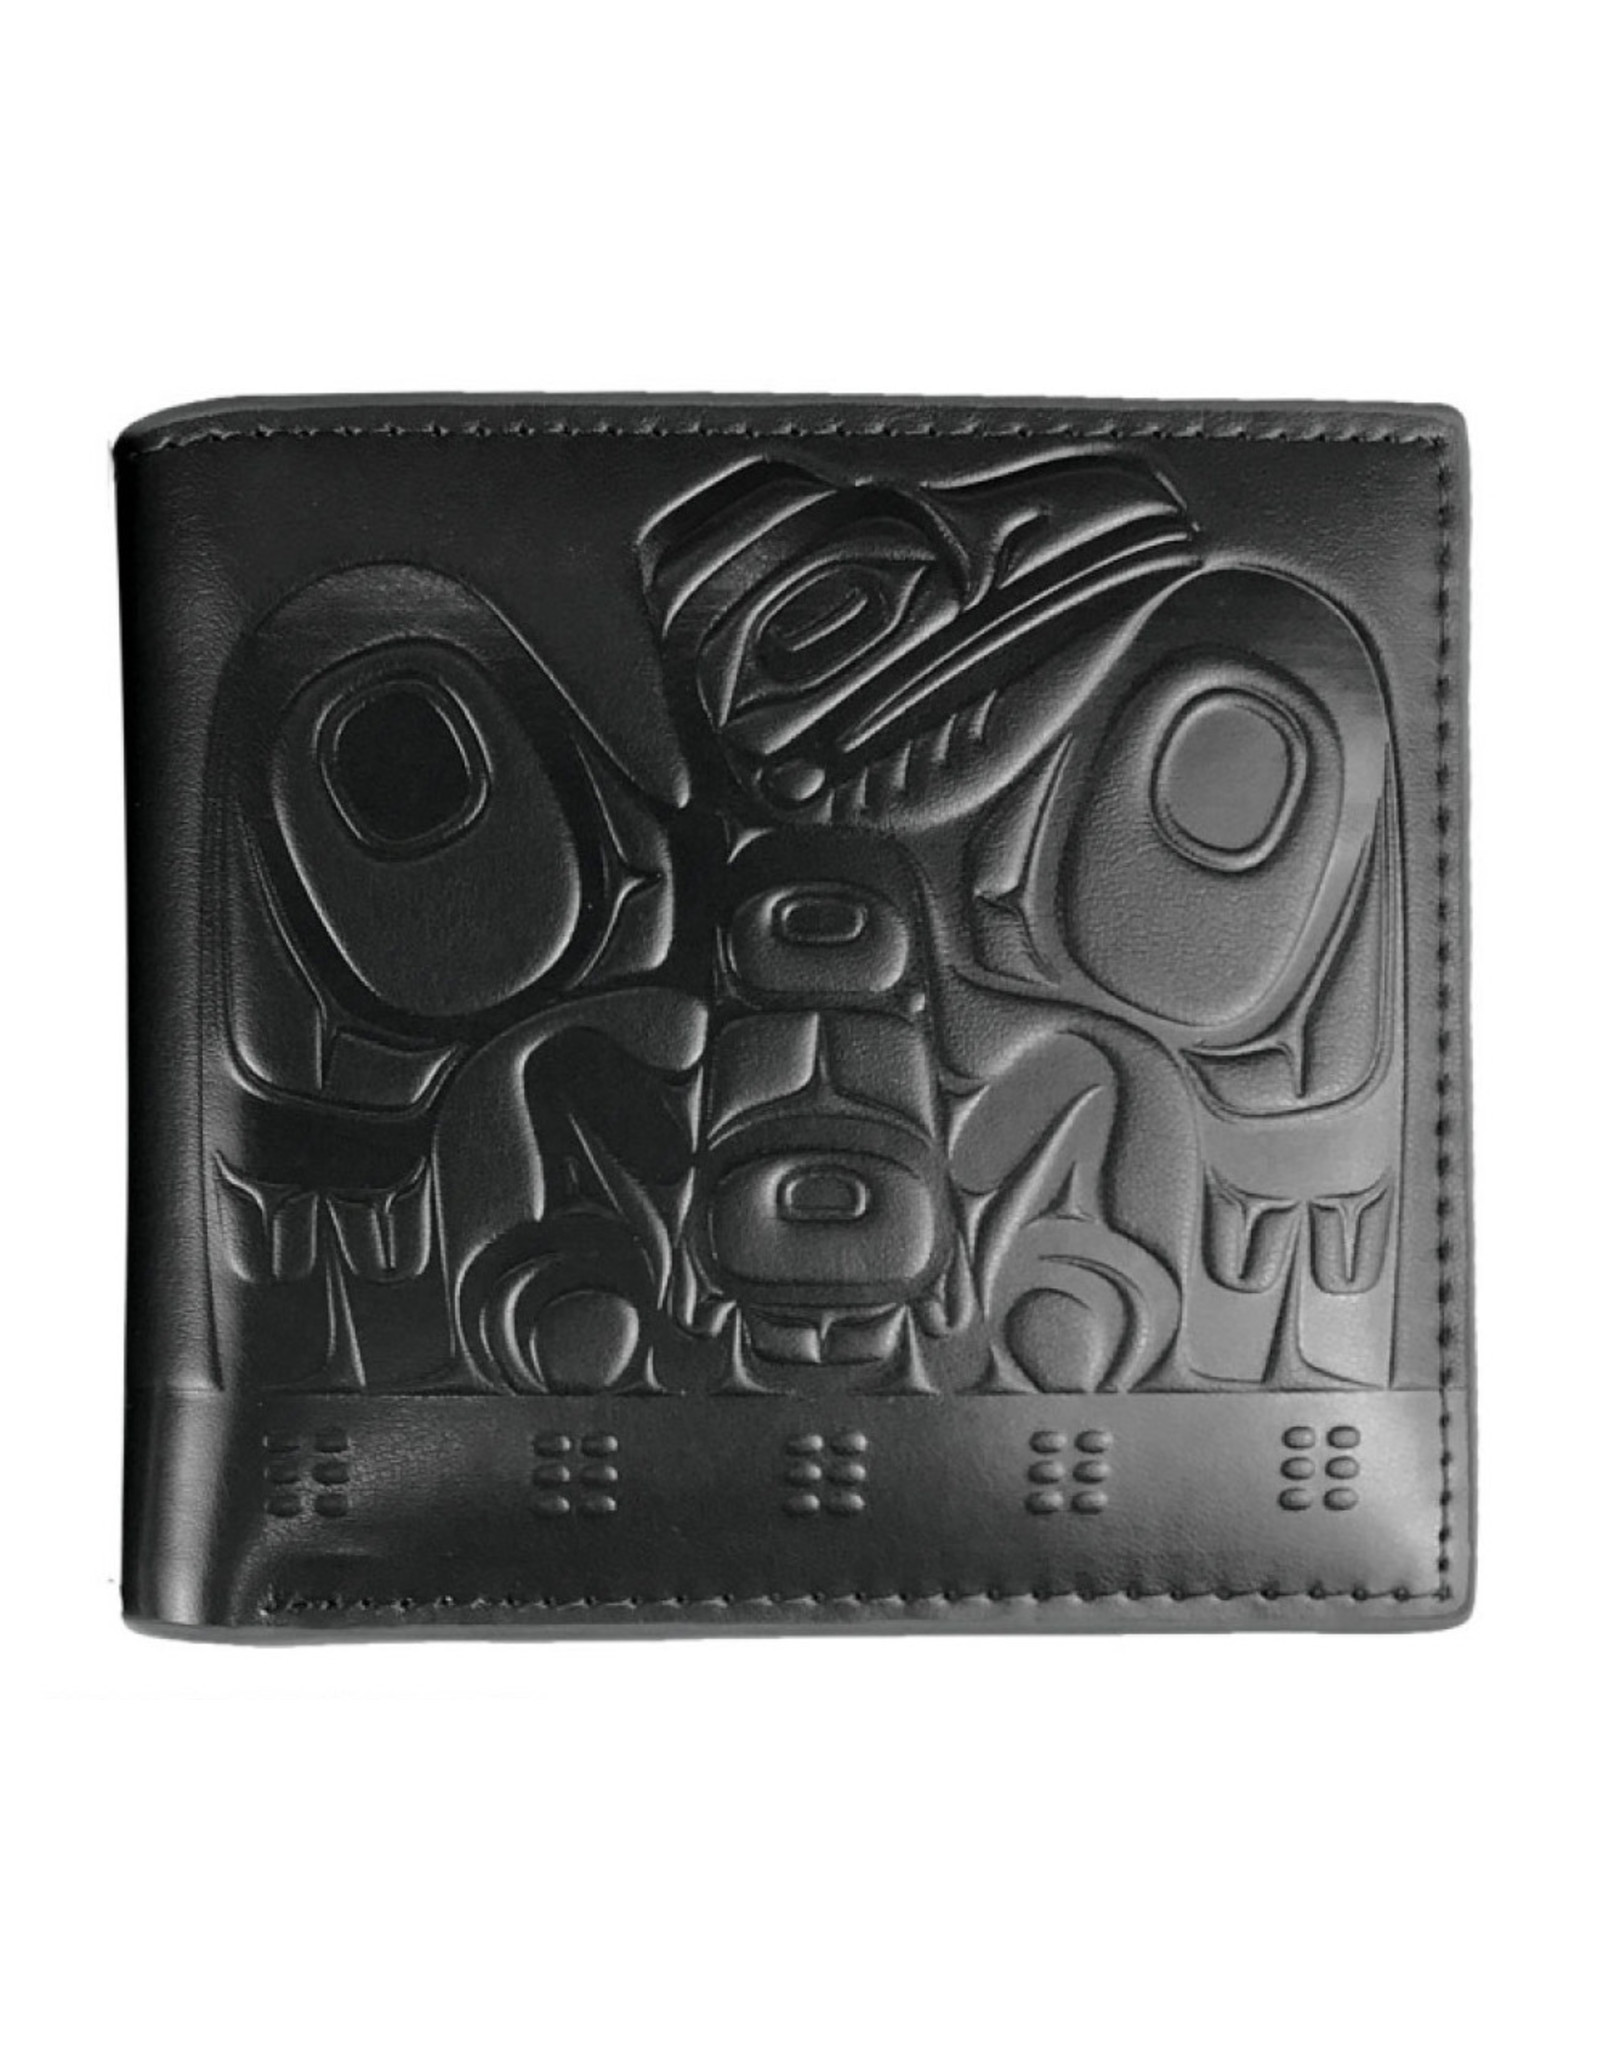 :eather Embossed Wallet by Allan Weir - Raven Box - EFW14